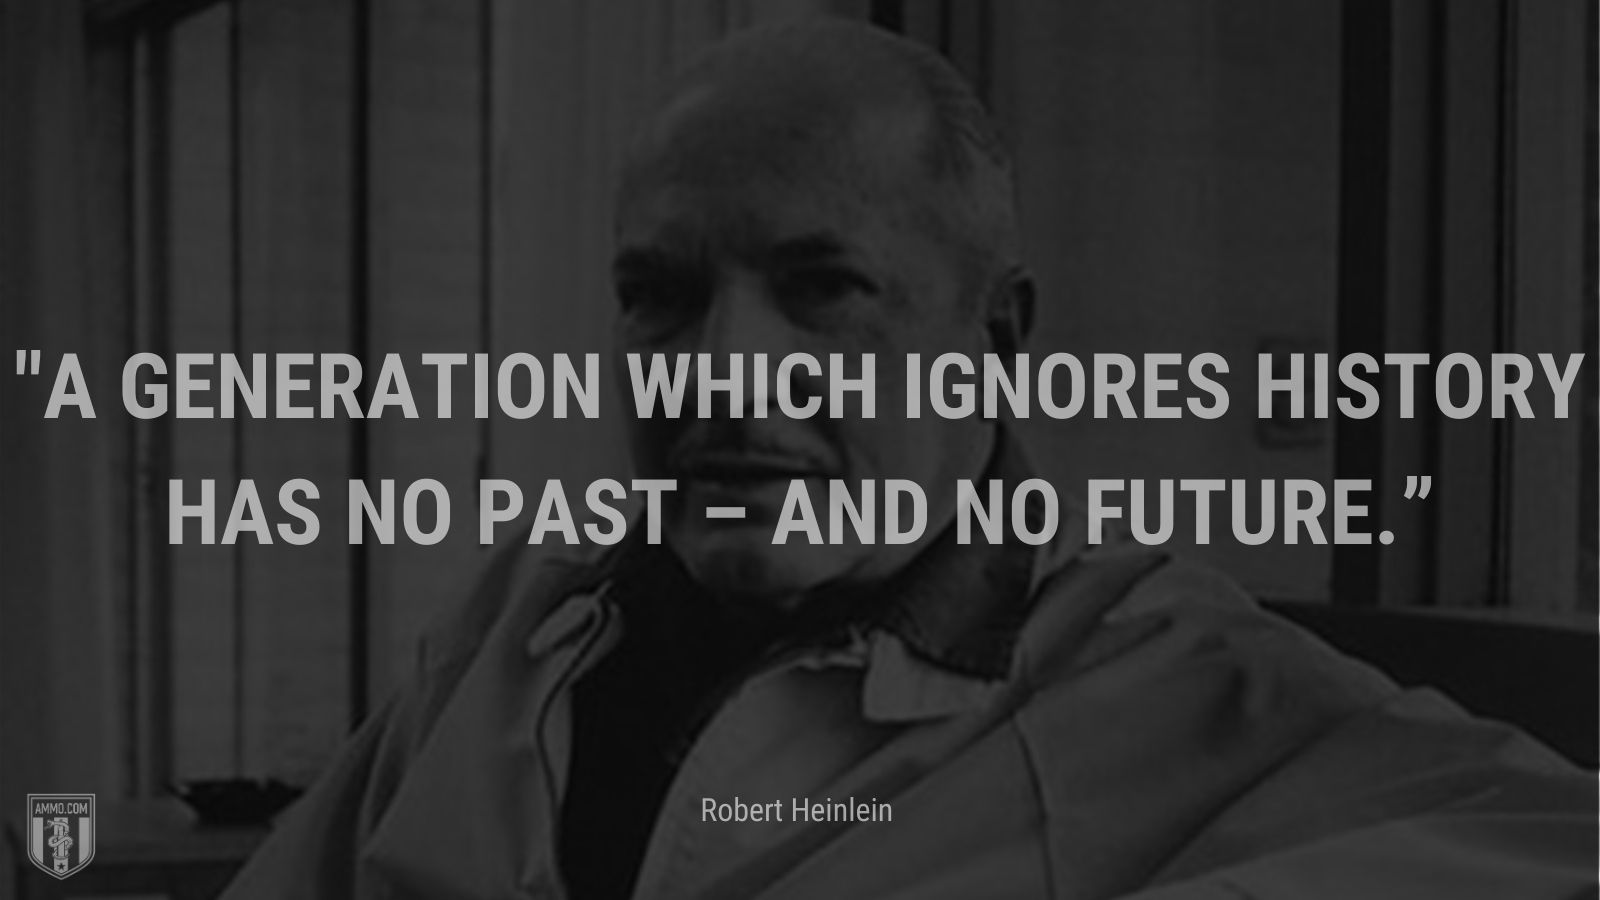 “A generation which ignores history has no past – and no future.” - Robert Heinlein